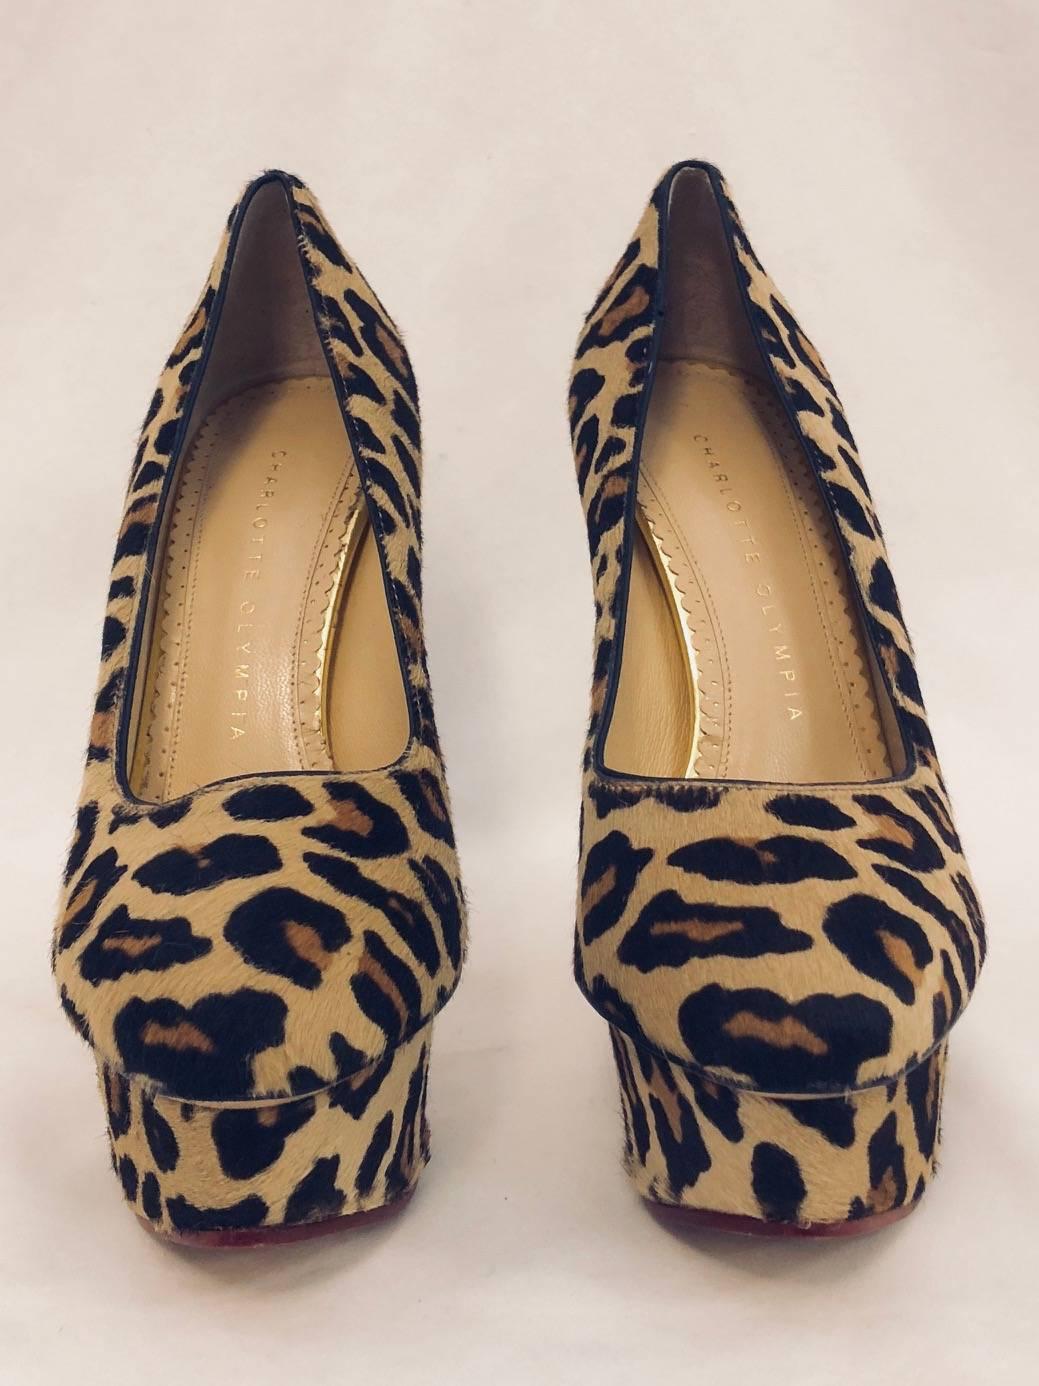 Charlotte Olympia's love of Hollywood glamour and sophistication is evident in her wildly popular ”Dolly” Pump. 
 Fit for a Siren, these unforgettable shoes feature leopard print calf hair uppers and covered platforms.  Tan leather soles, insoles